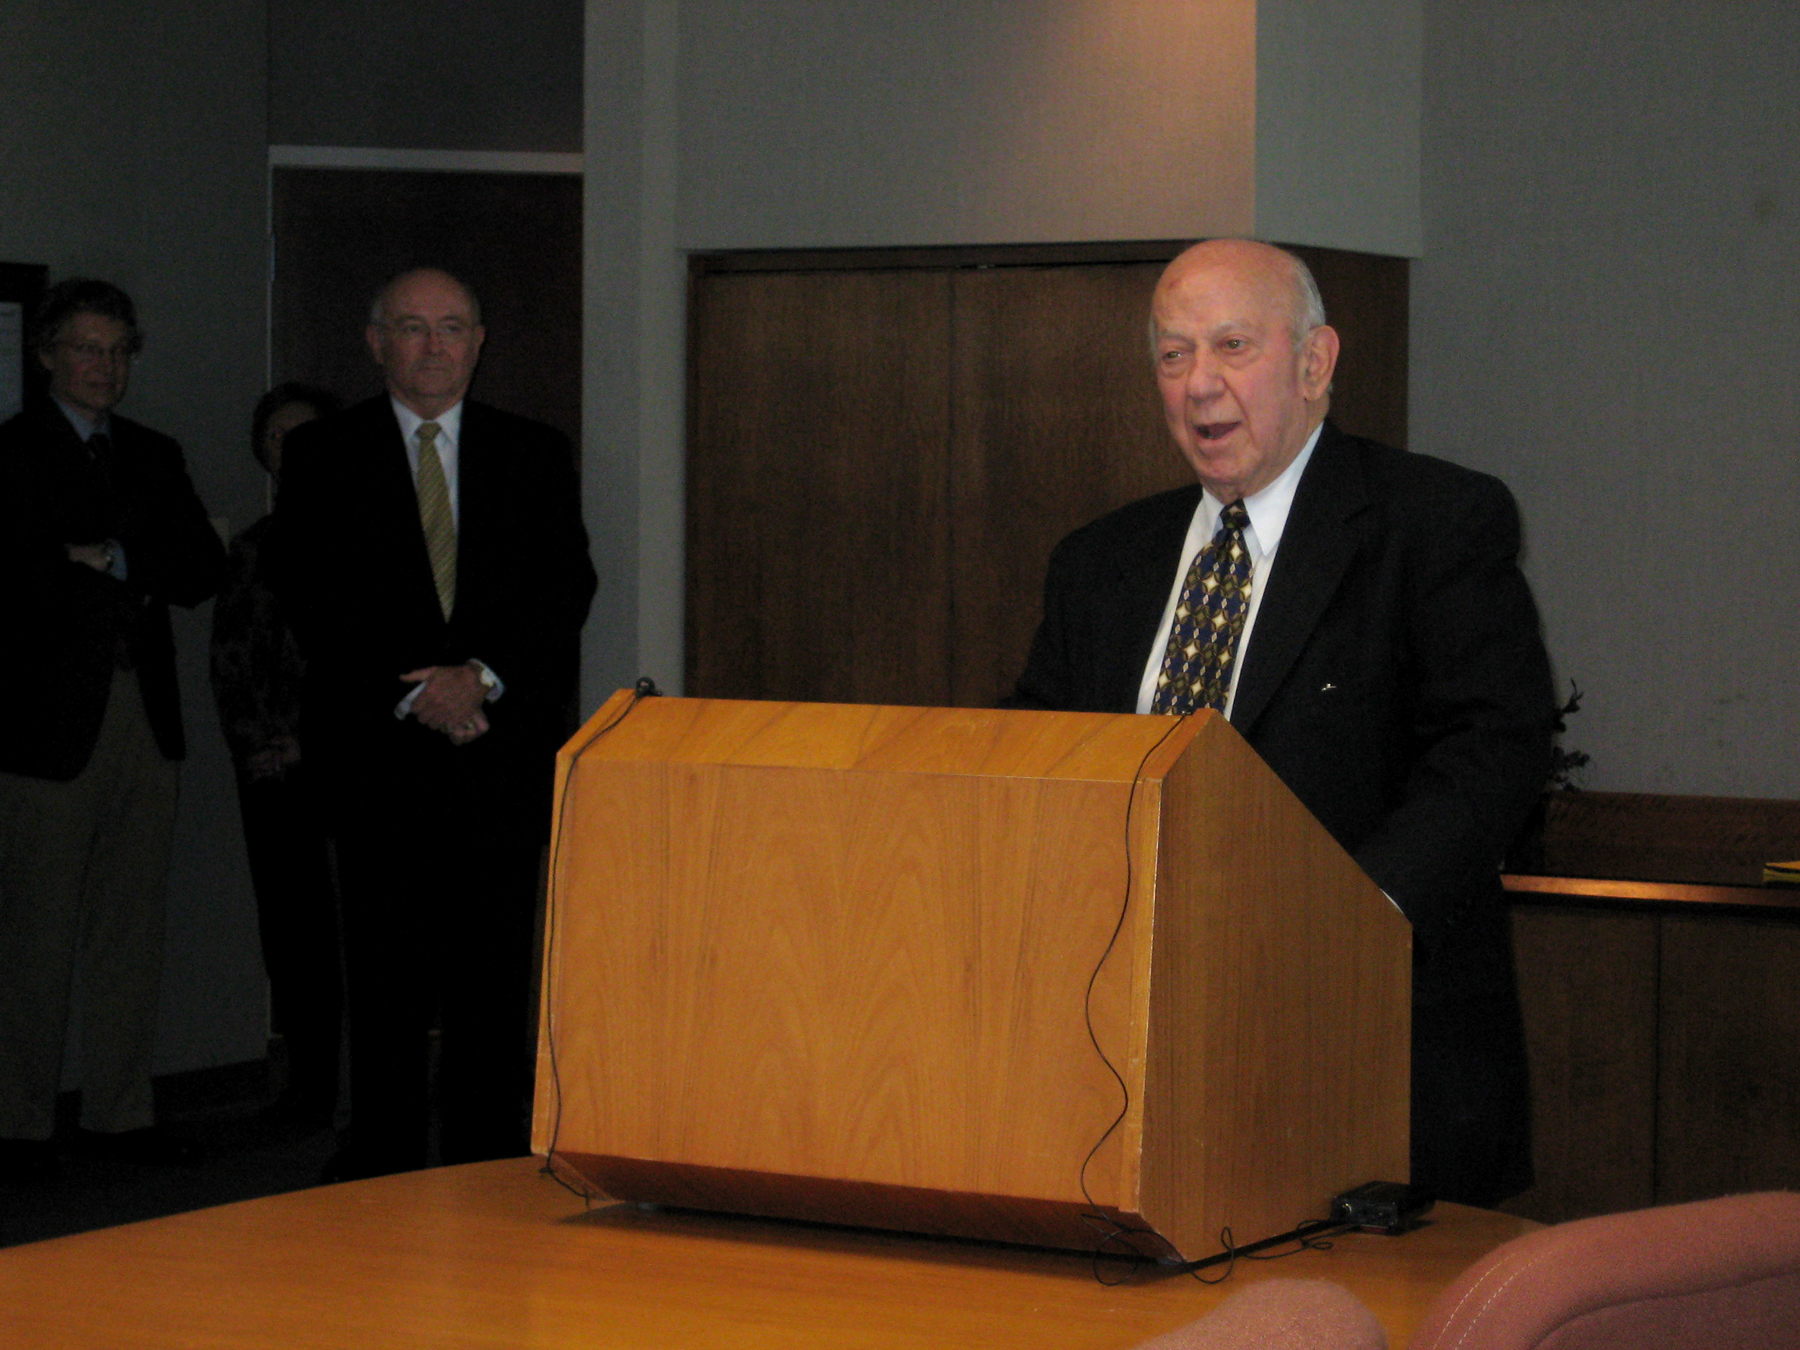 WSU President Don Beggs talks at the opening of WSU South Campus on Friday, March 14.